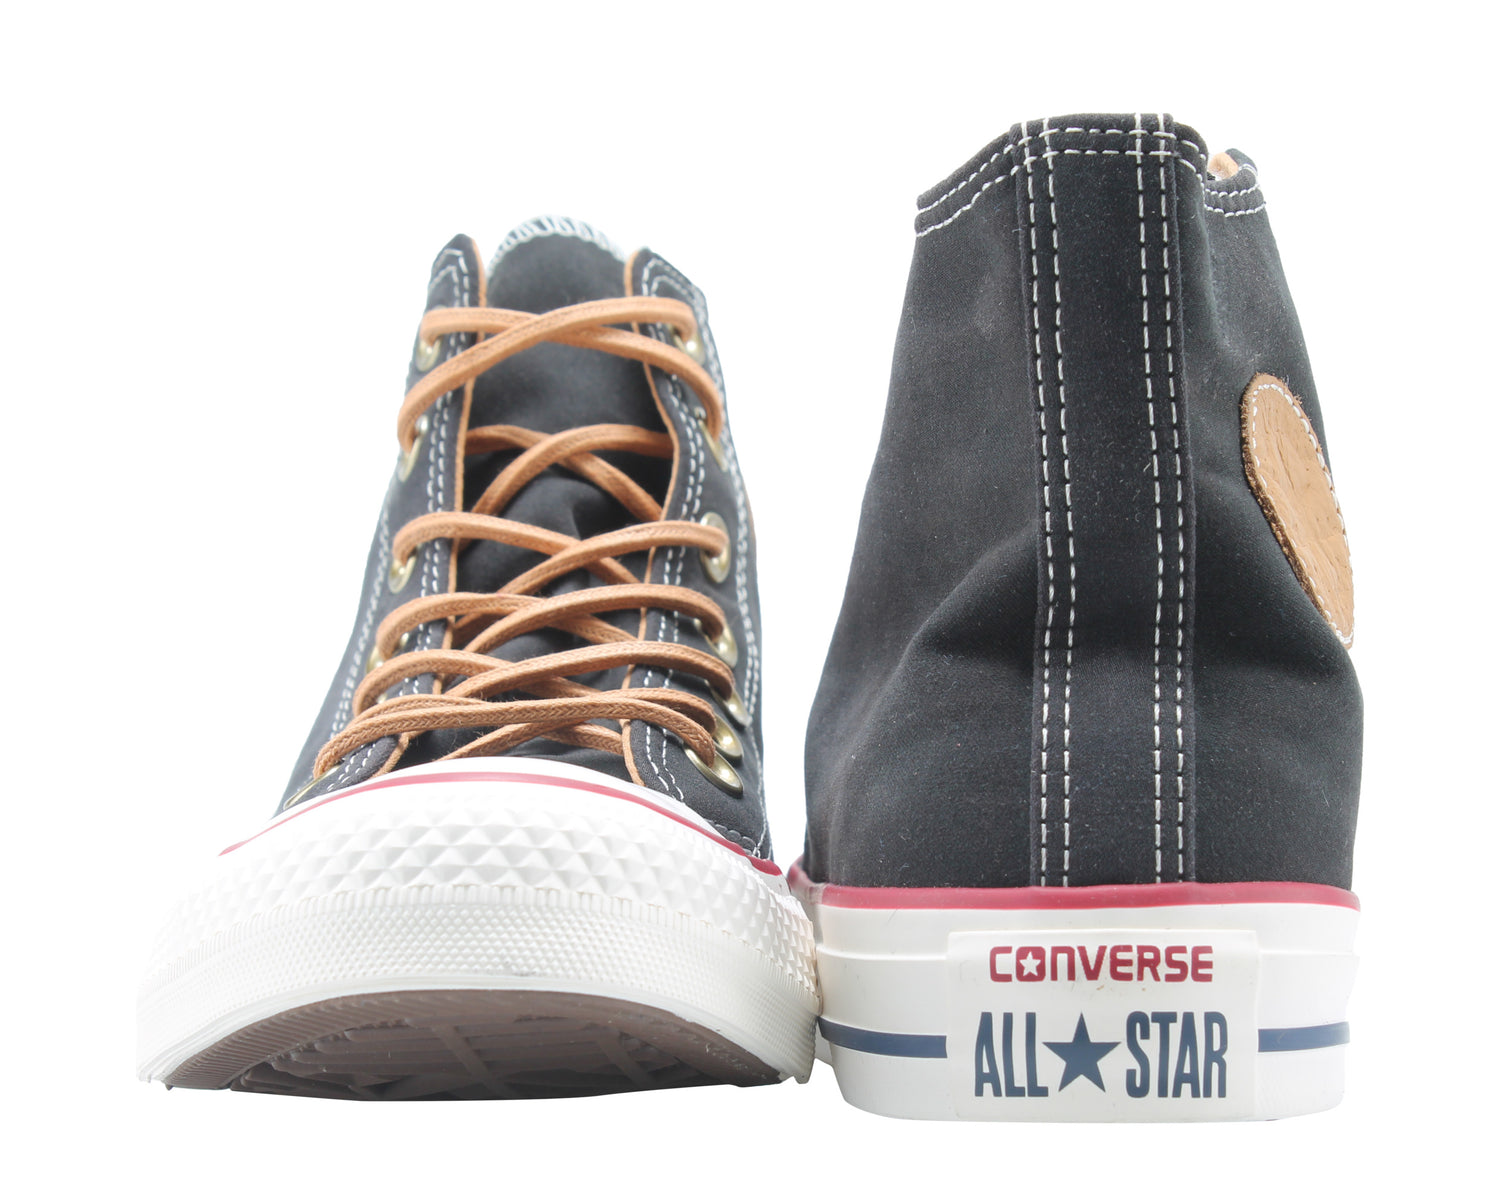 Converse Chuck Taylor All Star High Top Sneakers